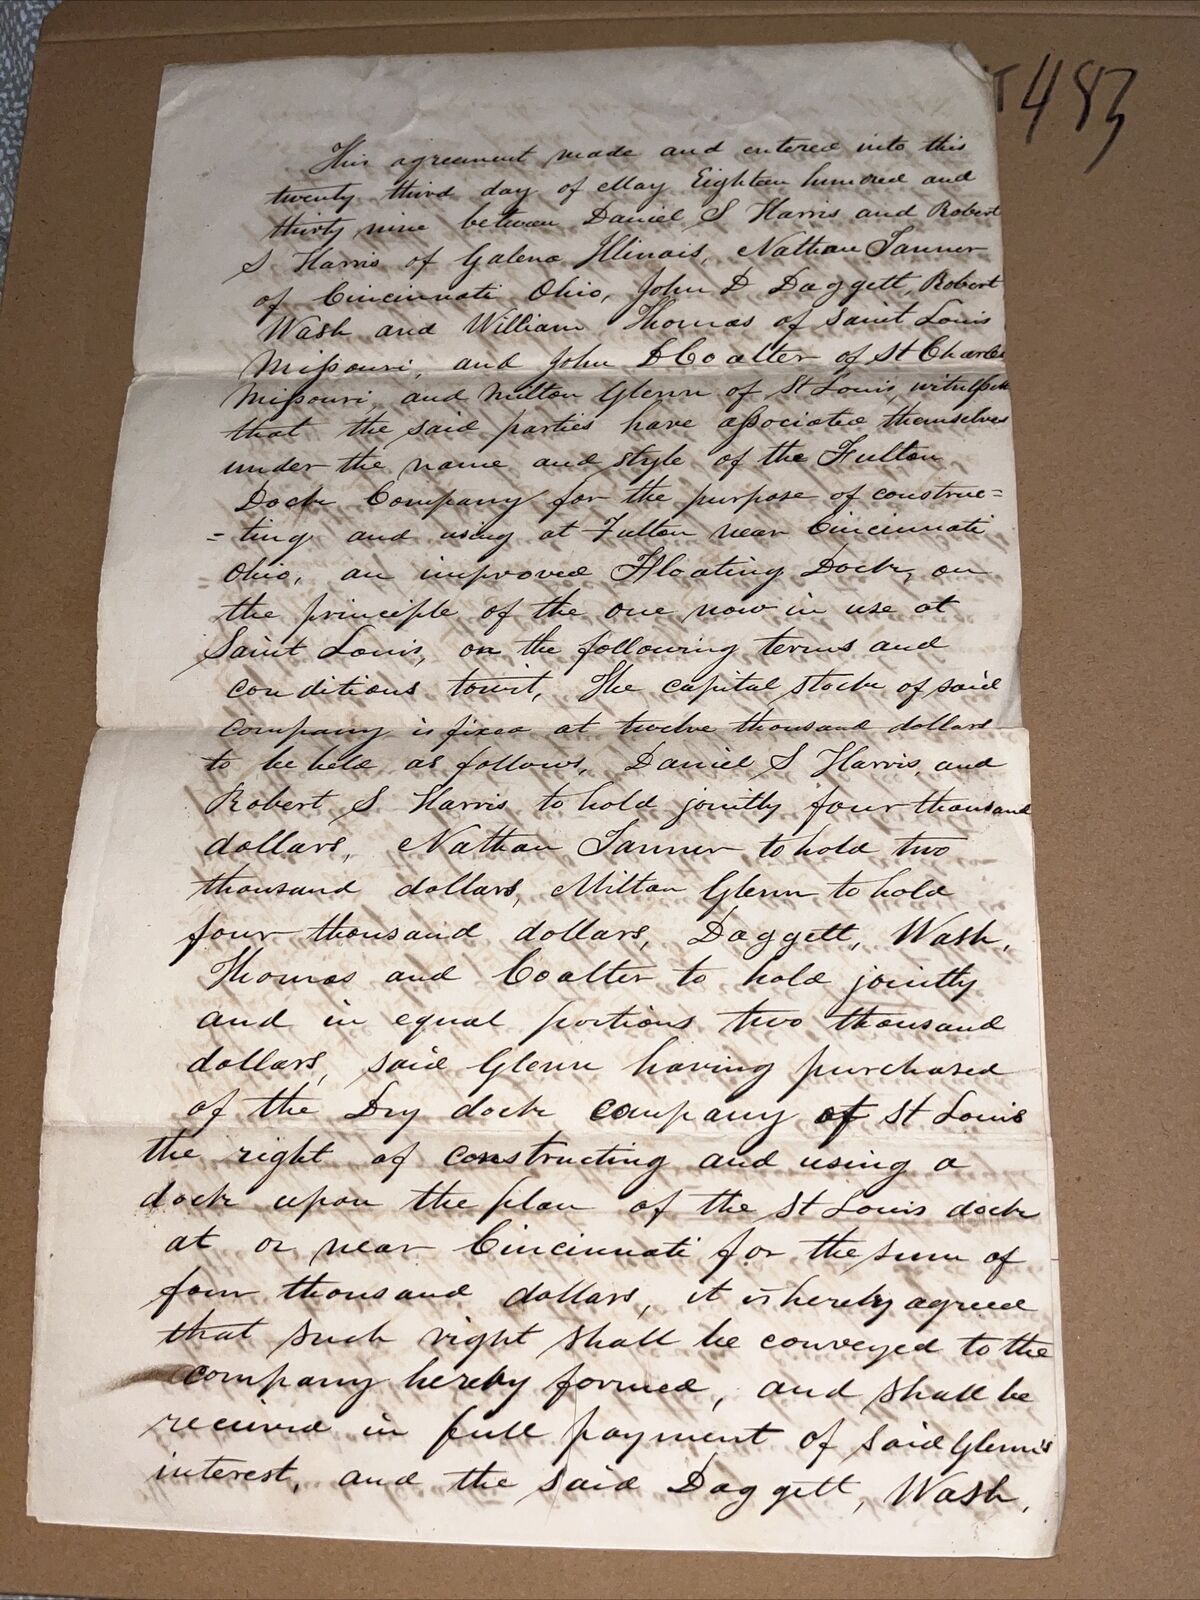 1839 Dock Company Agreement Signed: Famous Steamboat Captain Daniel Smith Harris